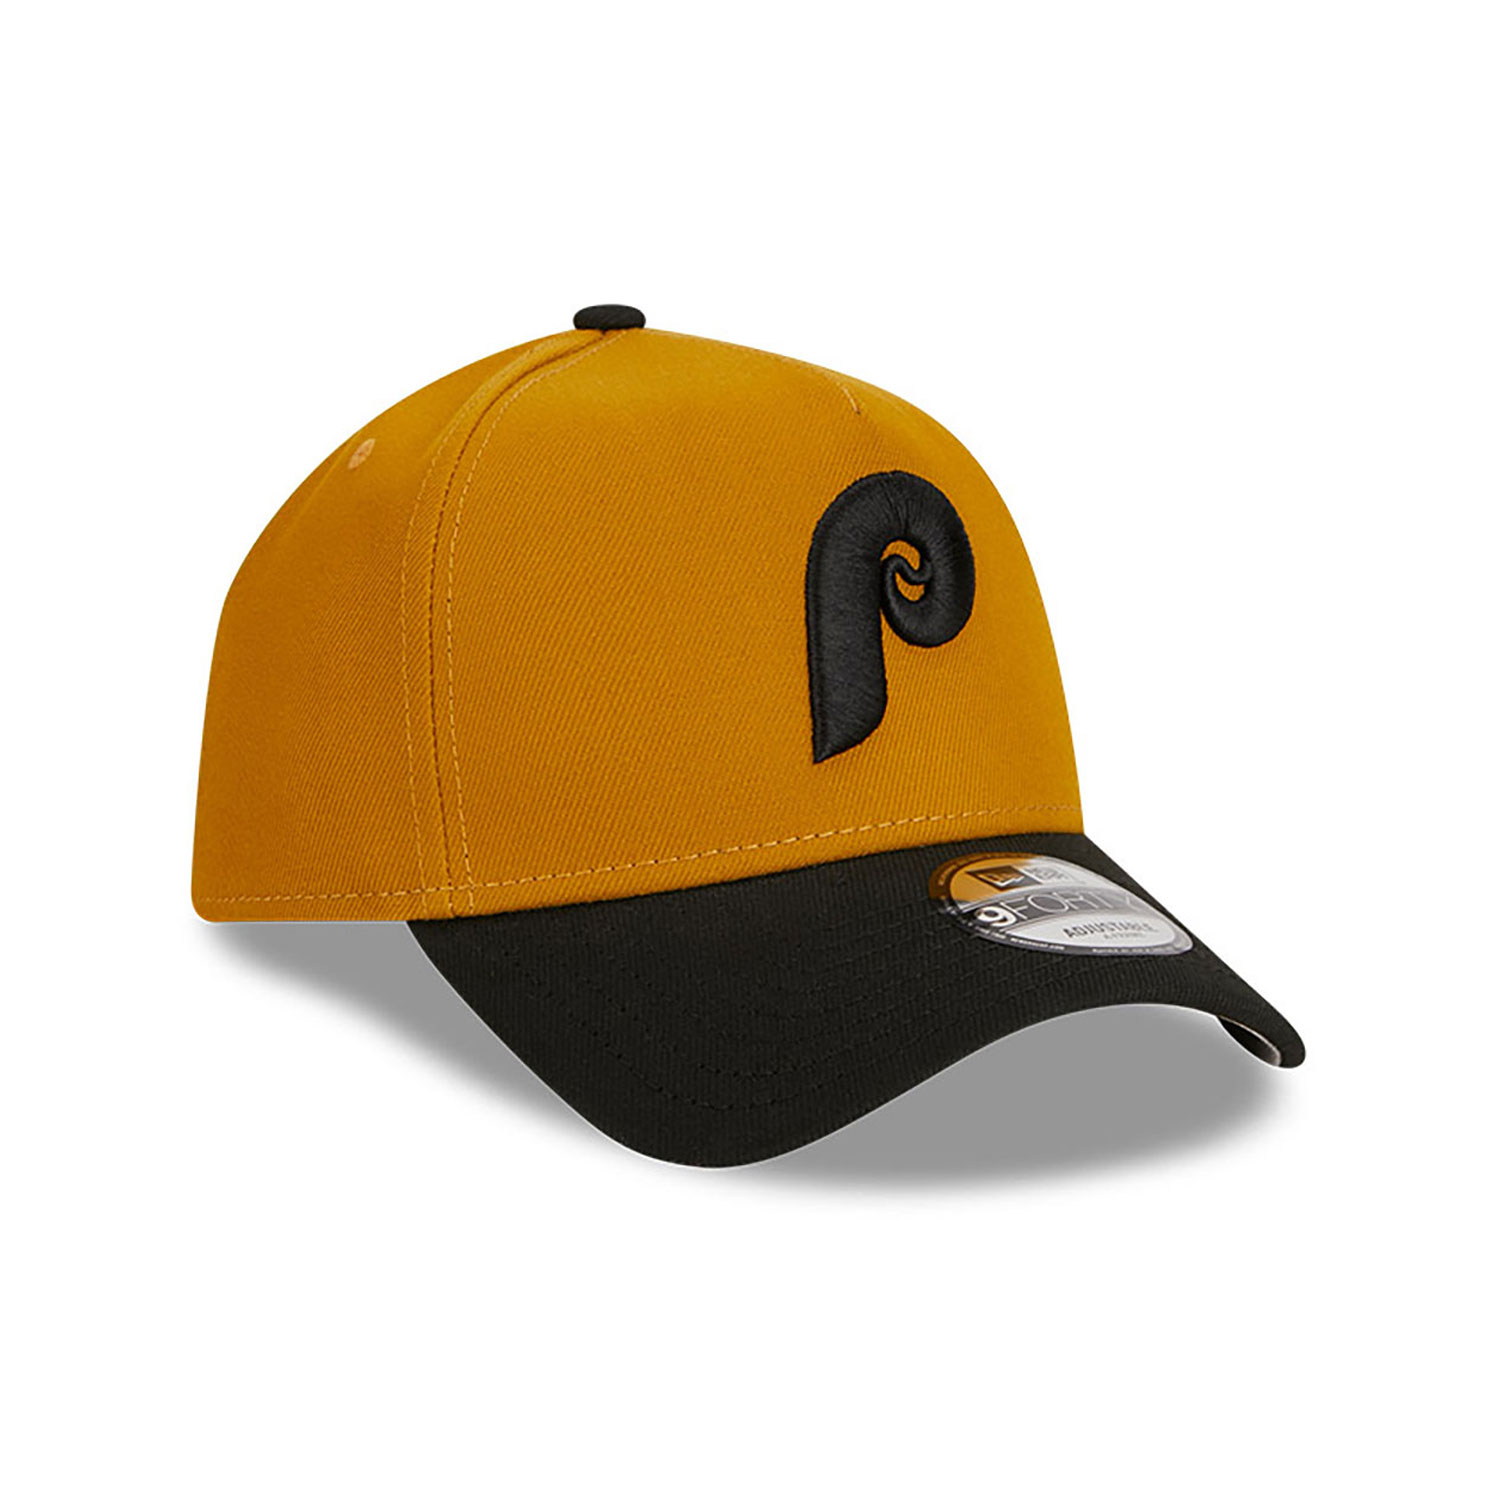 Philadelphia Phillies Rustic Fall Gold A-Frame 9FORTY Adjustable Cap